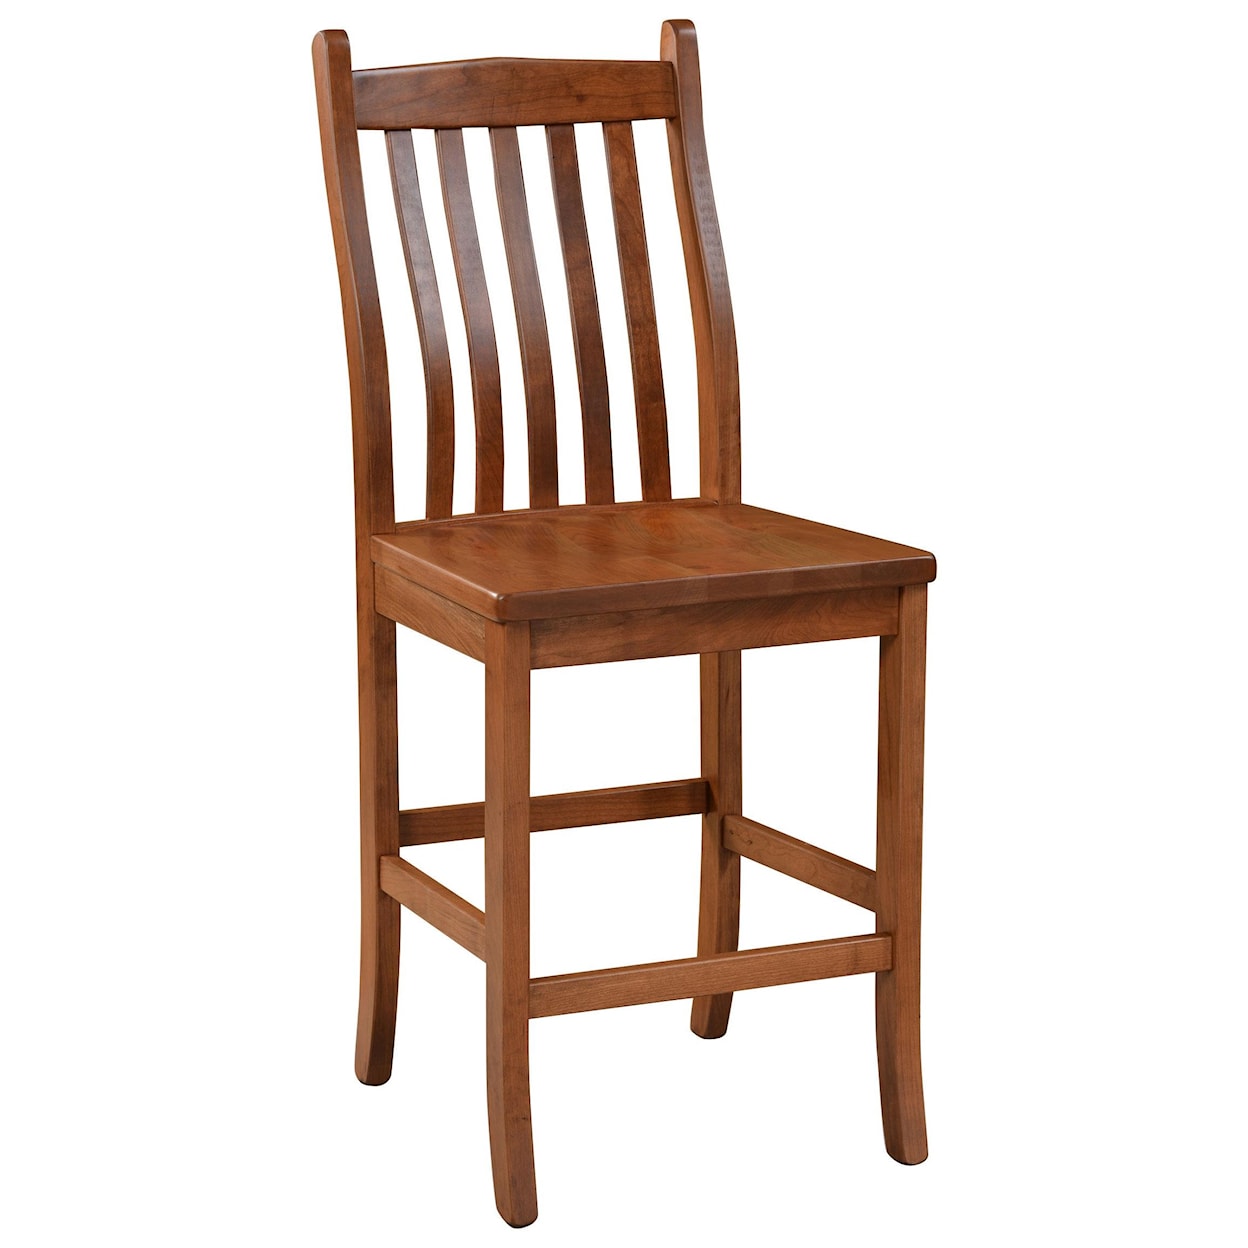 Wengerd Wood Products Lincoln 24" Stationary Stool